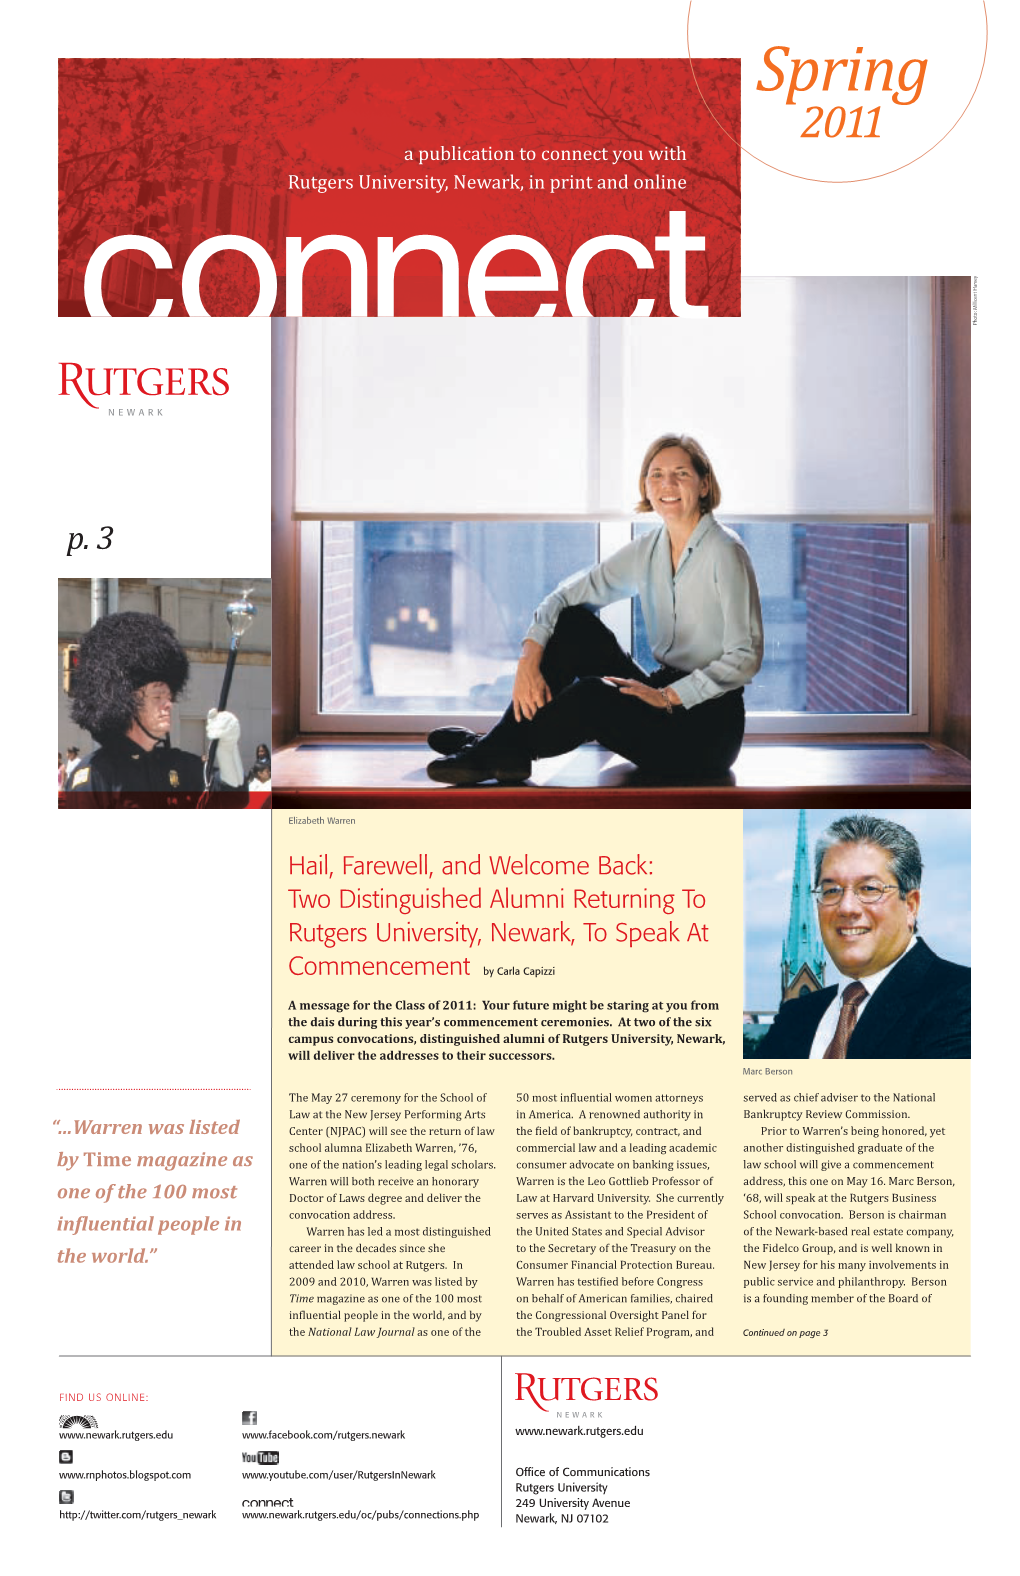 Spring 2011 a Publication to Connect You with Rutgers University, Newark, in Print and Online Photo: Millicent Harvey